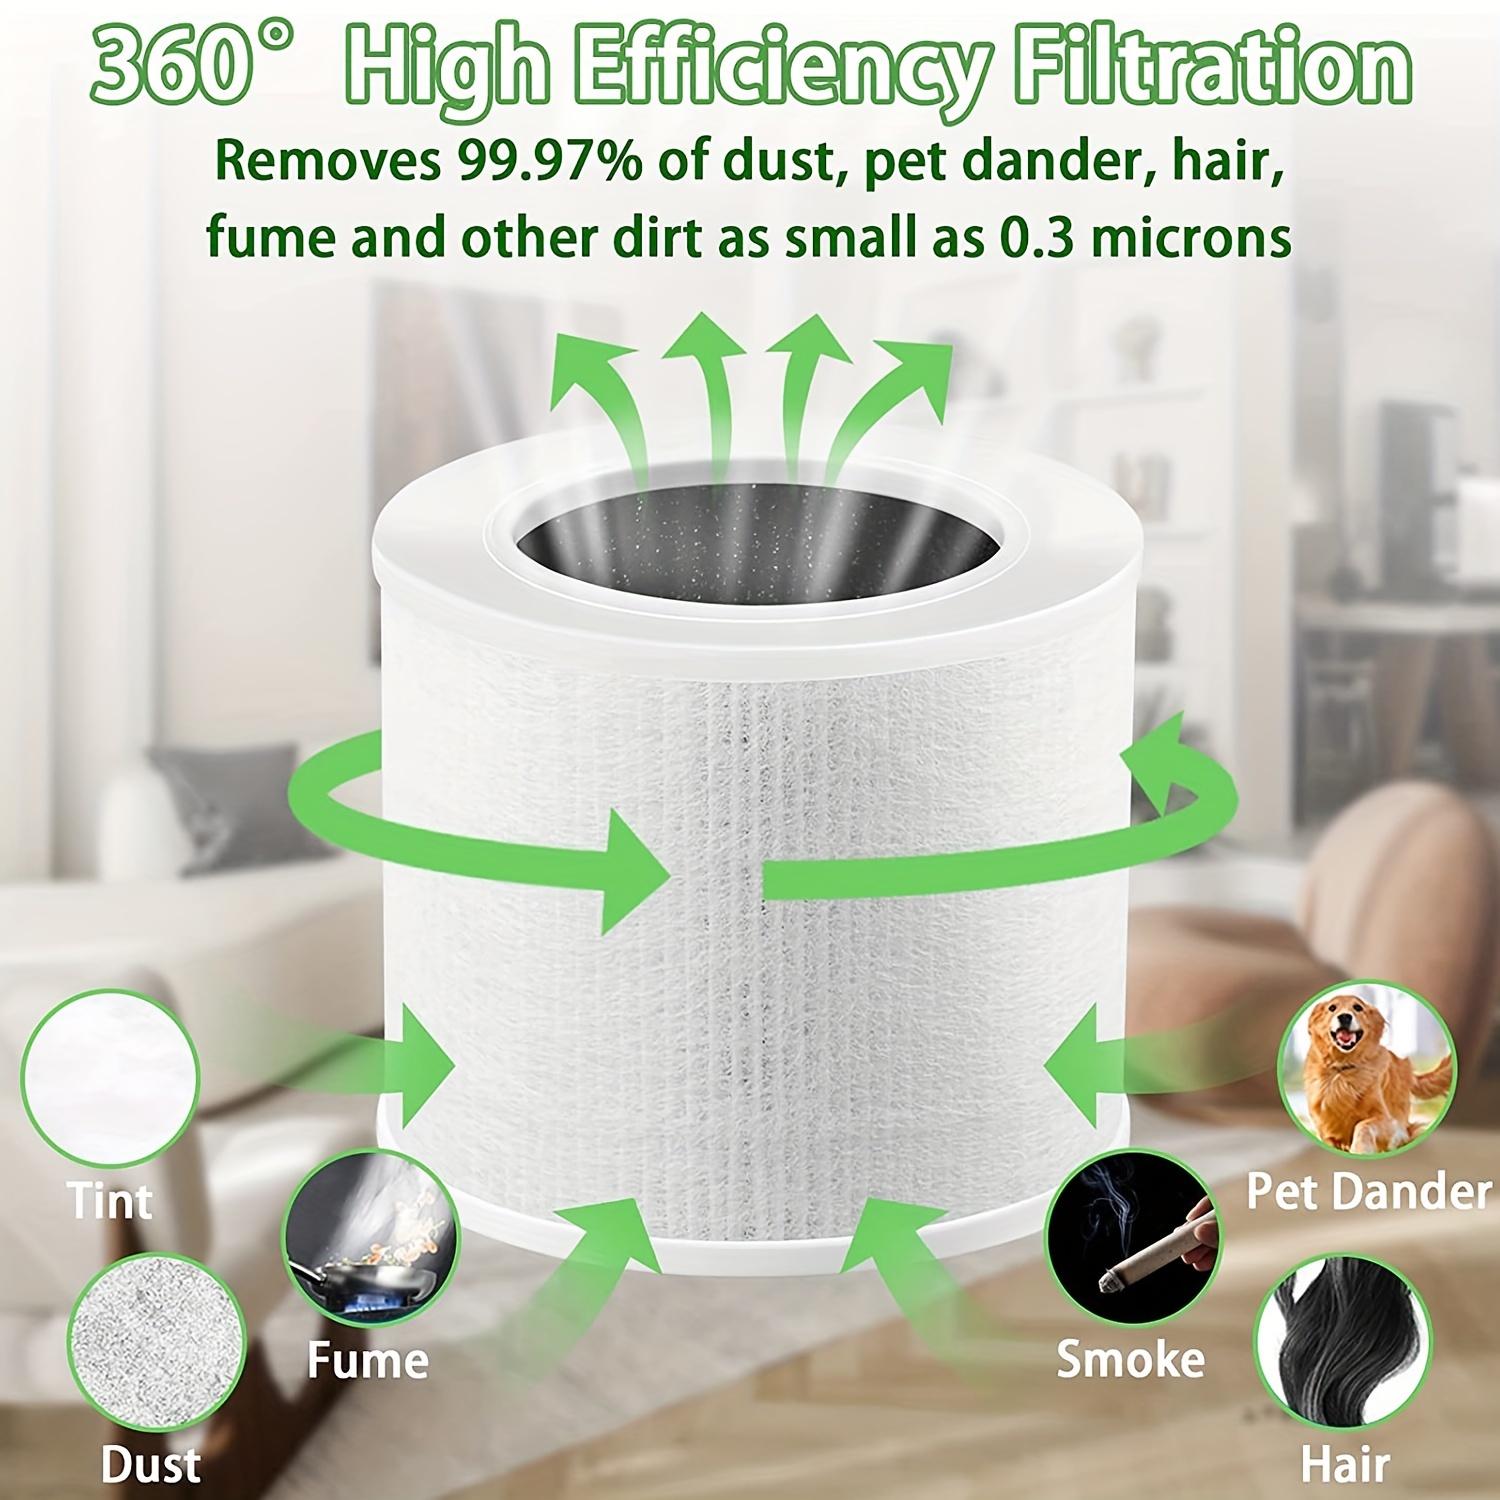 Levoit Core 300 Air Purifier Replacement Filter, 3-in-1 True Hepa,  High-efficiency Activated Carbon, Core300 Rf,, White - Temu Australia